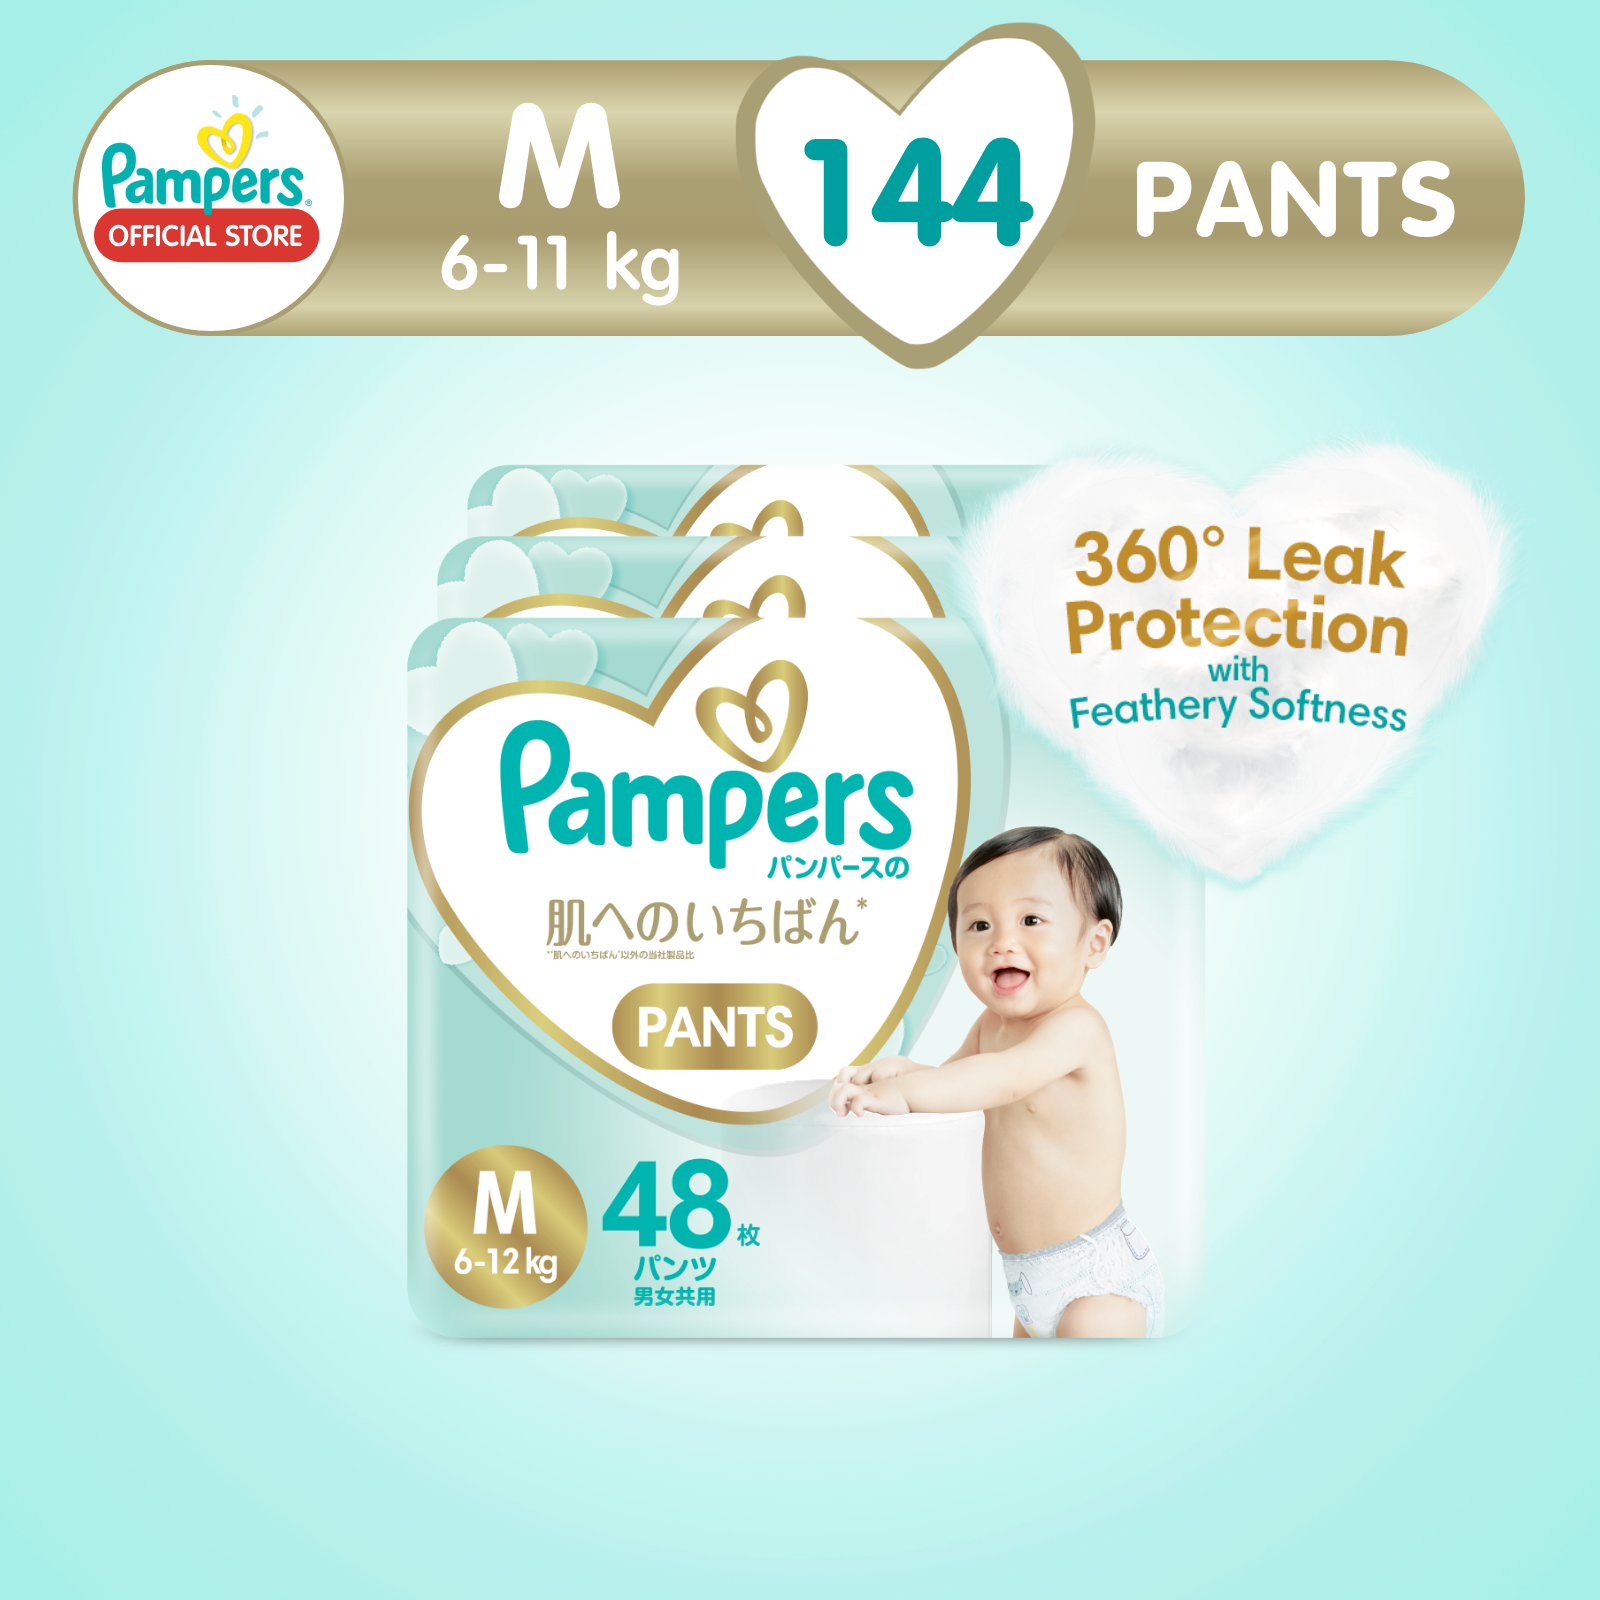 Buy Pampers Premium Care Diaper Pants - S, 4-8 kg, Lotion with Aloe Vera  Online at Best Price of Rs 1081.29 - bigbasket